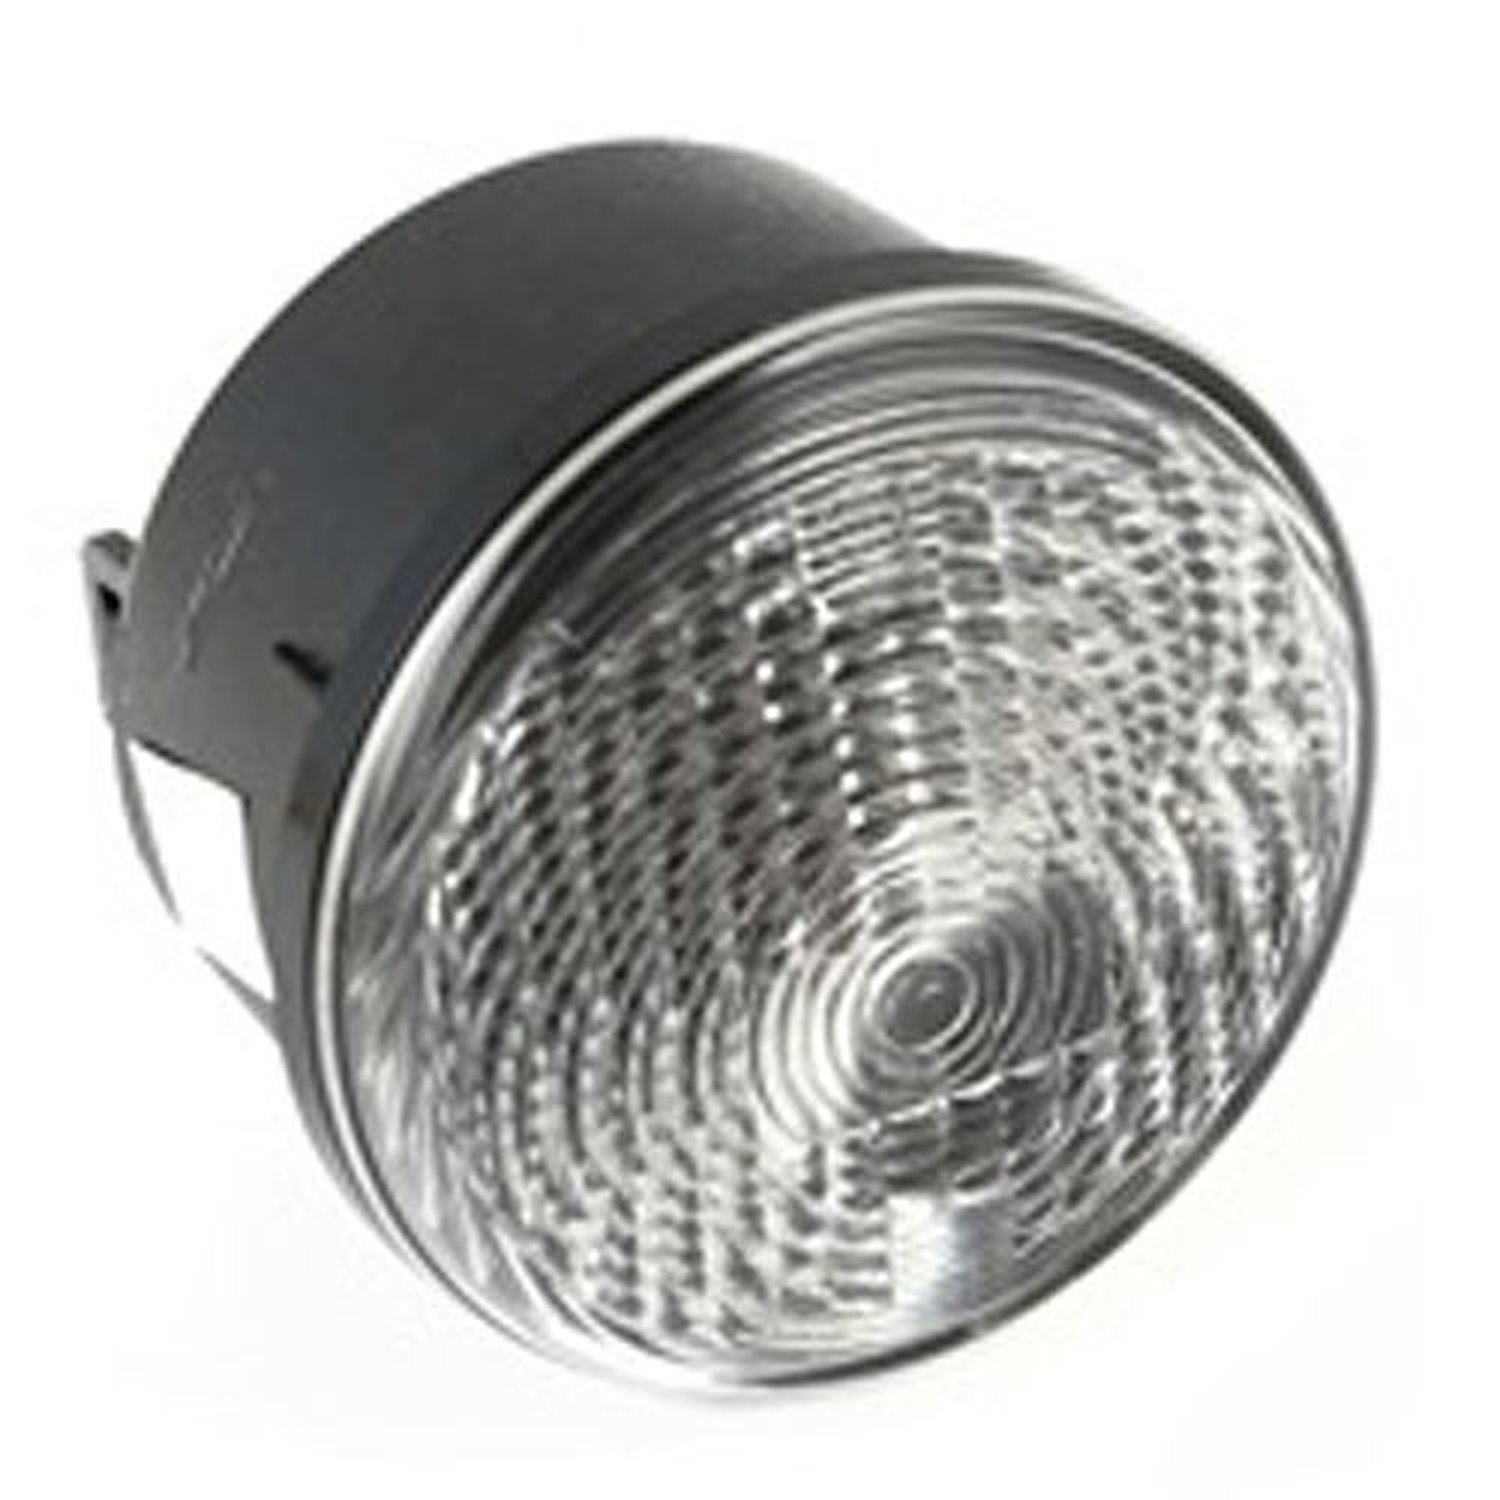 This left parking lamp assembly from Omix-ADA has a clear lens and bulb. Fits 07-16 Jeep Wranglers.